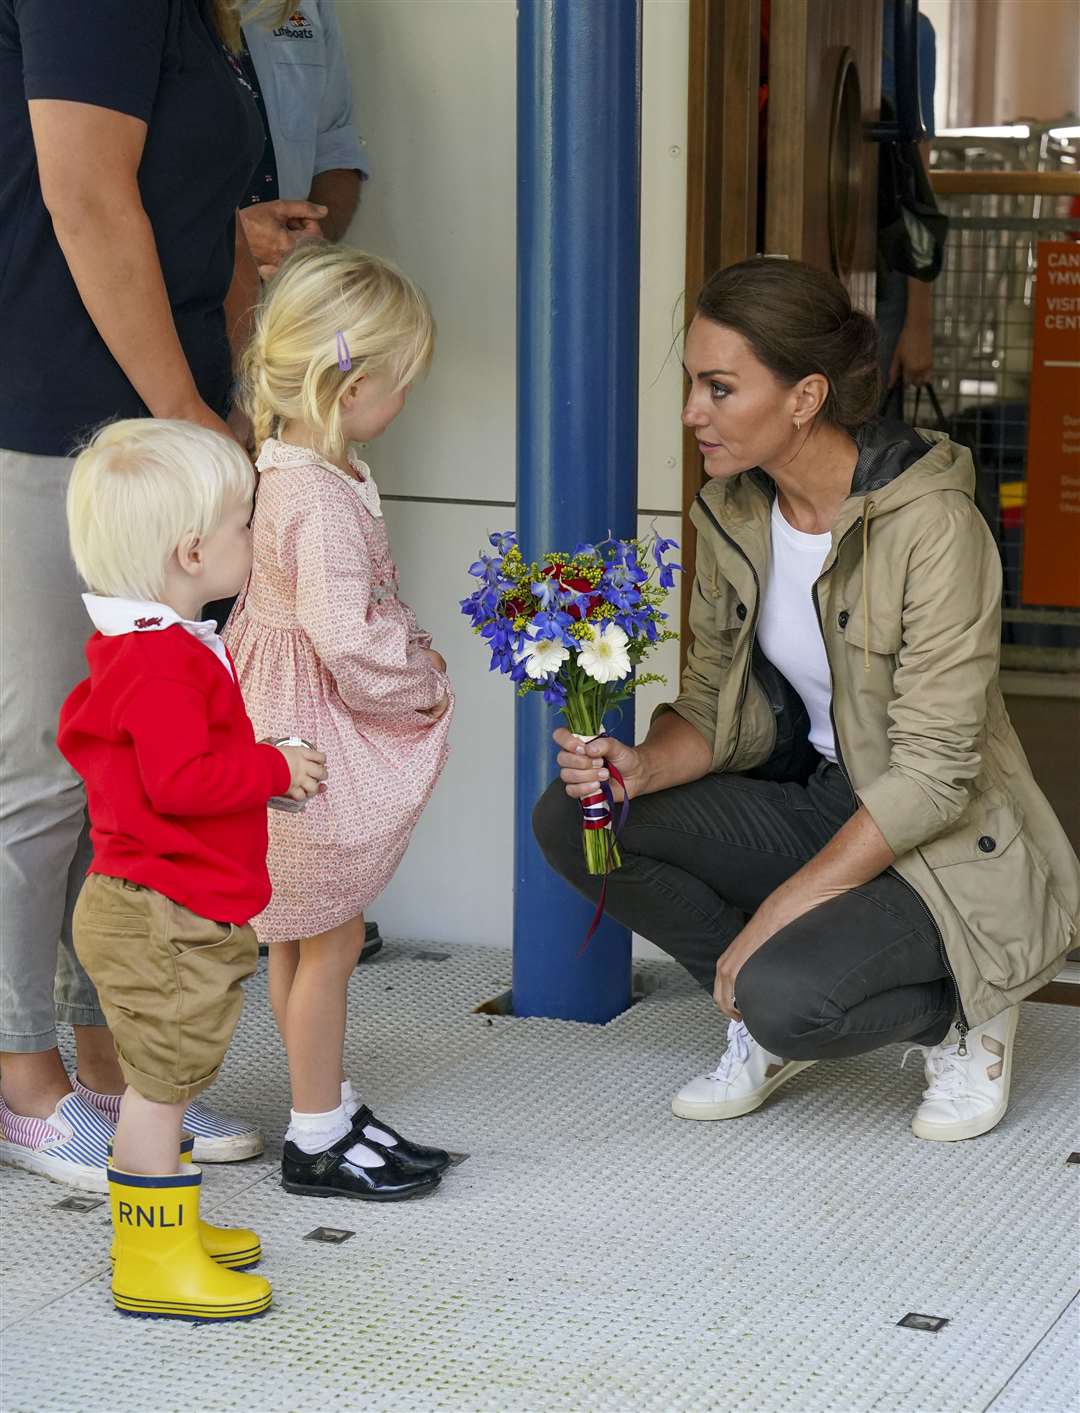 The Princess of Wales speaking to young children during a visit to the RNLI lifeboat station at St Davids (Arthur Edwards/The Sun/PA)